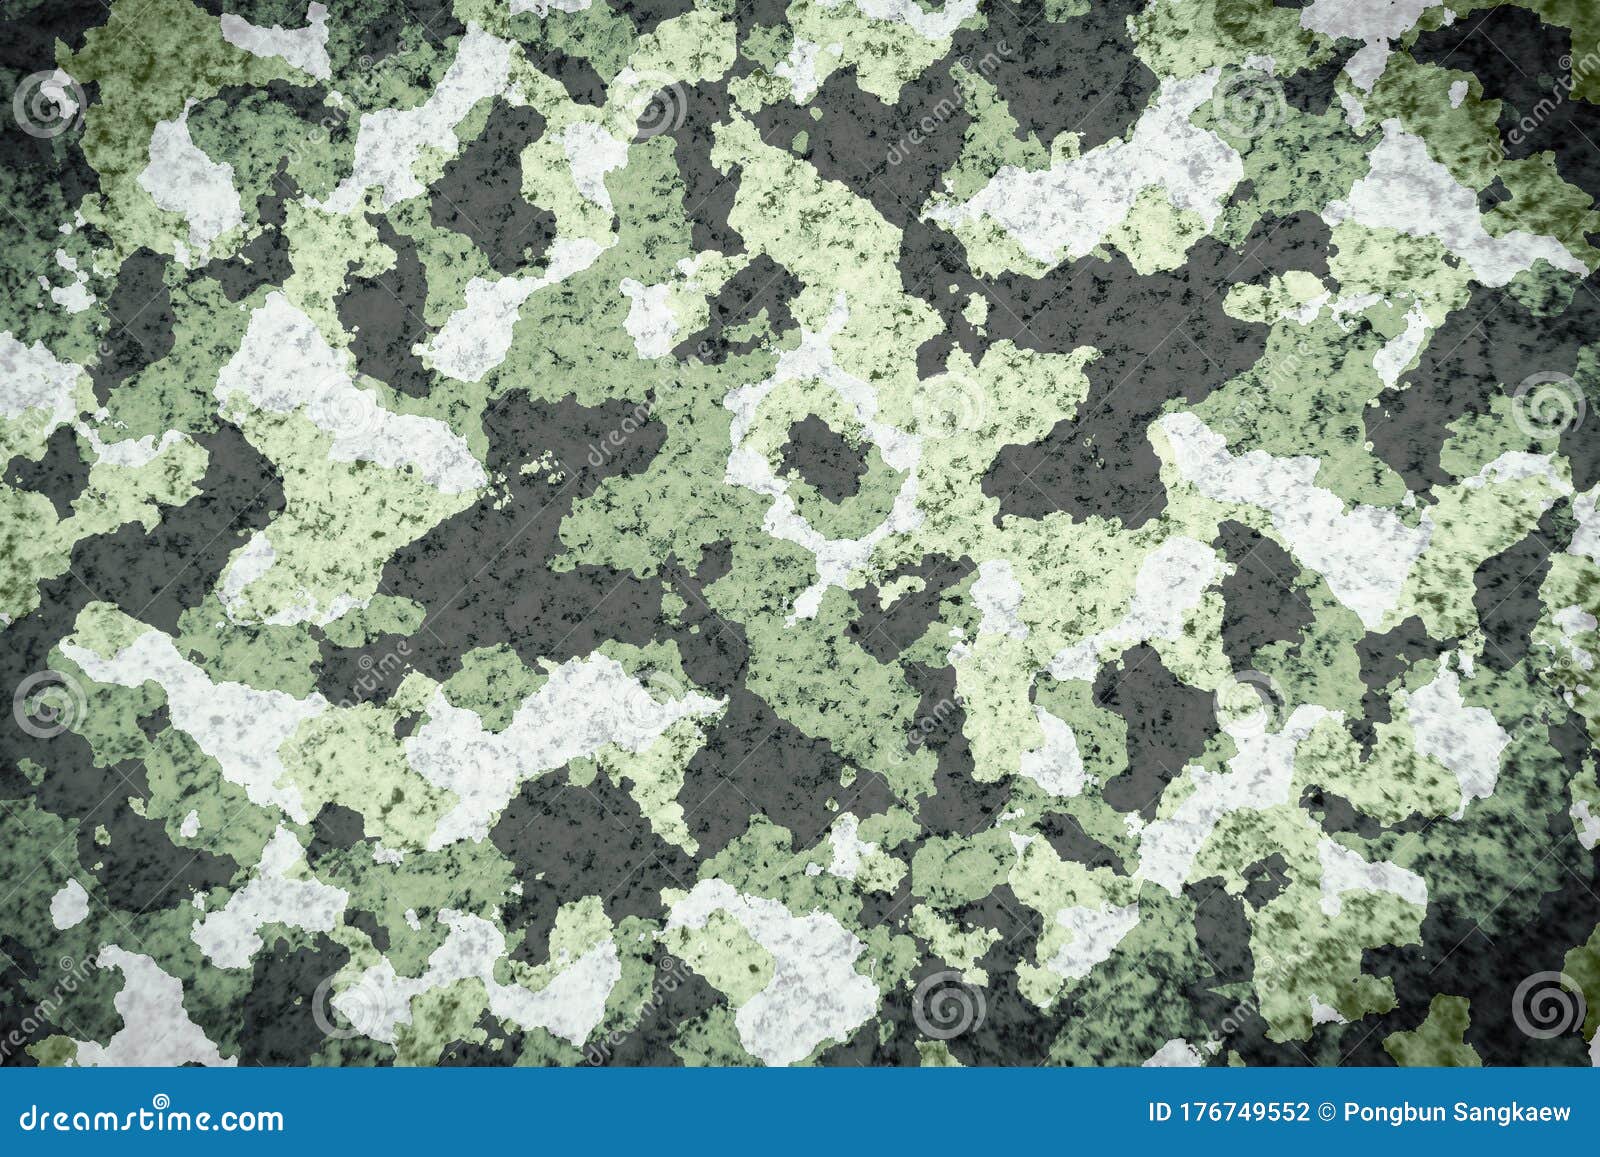 camoflauge green ,black and  white color pattern abstract grunge background